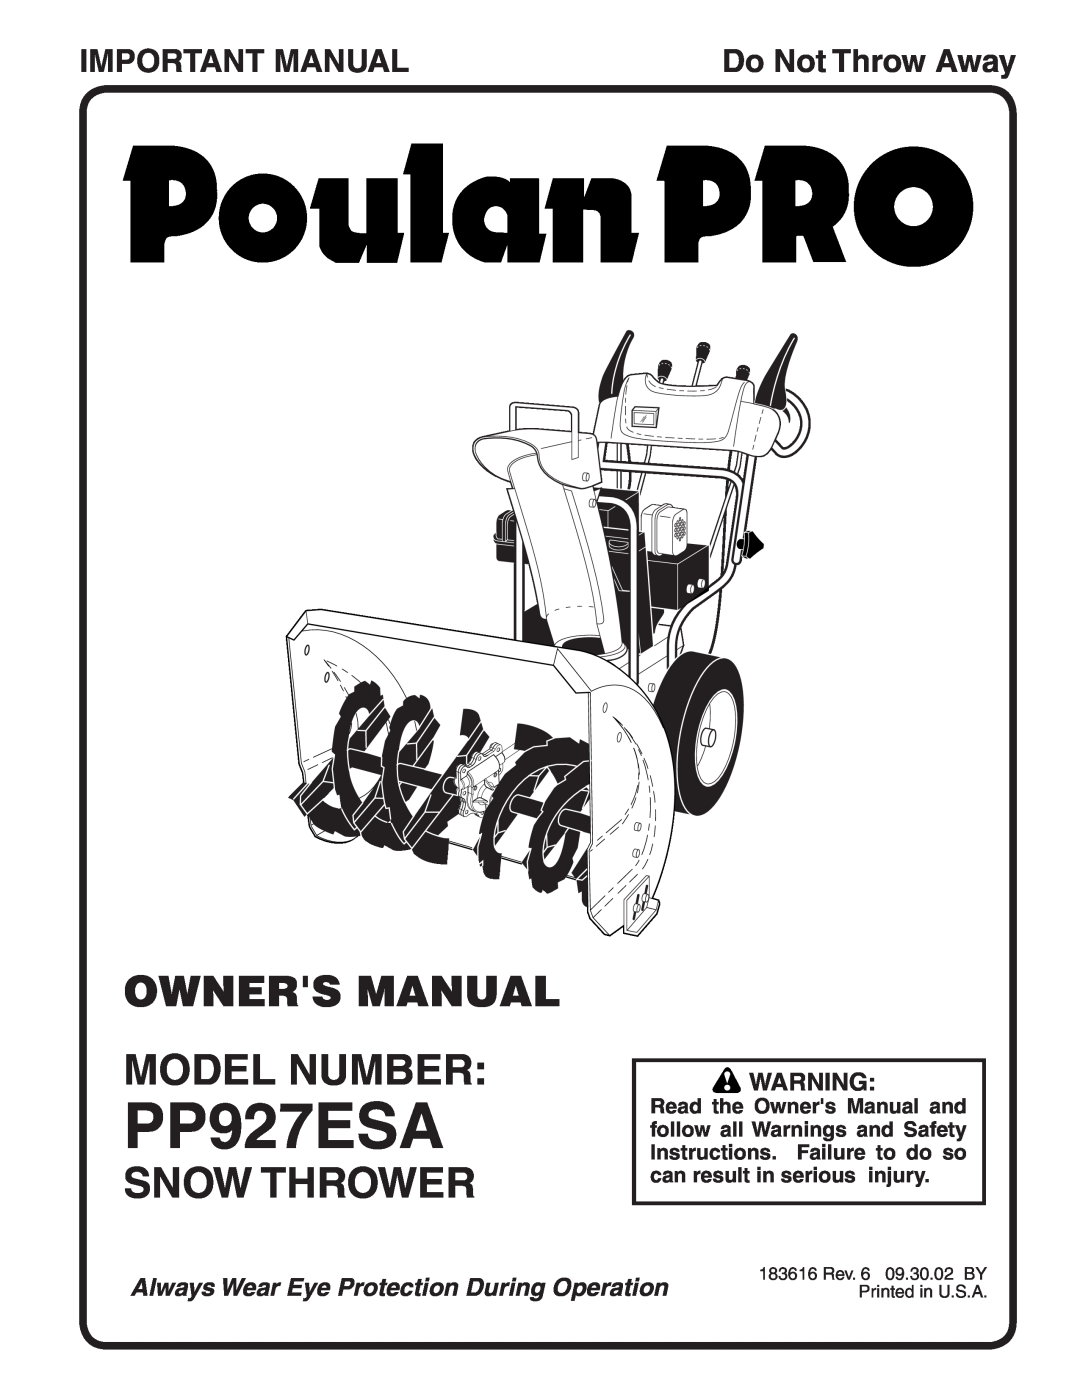 Poulan 183616 owner manual Owners Manual Model Number, Snow Thrower, Important Manual, PP927ESA, Do Not Throw Away 